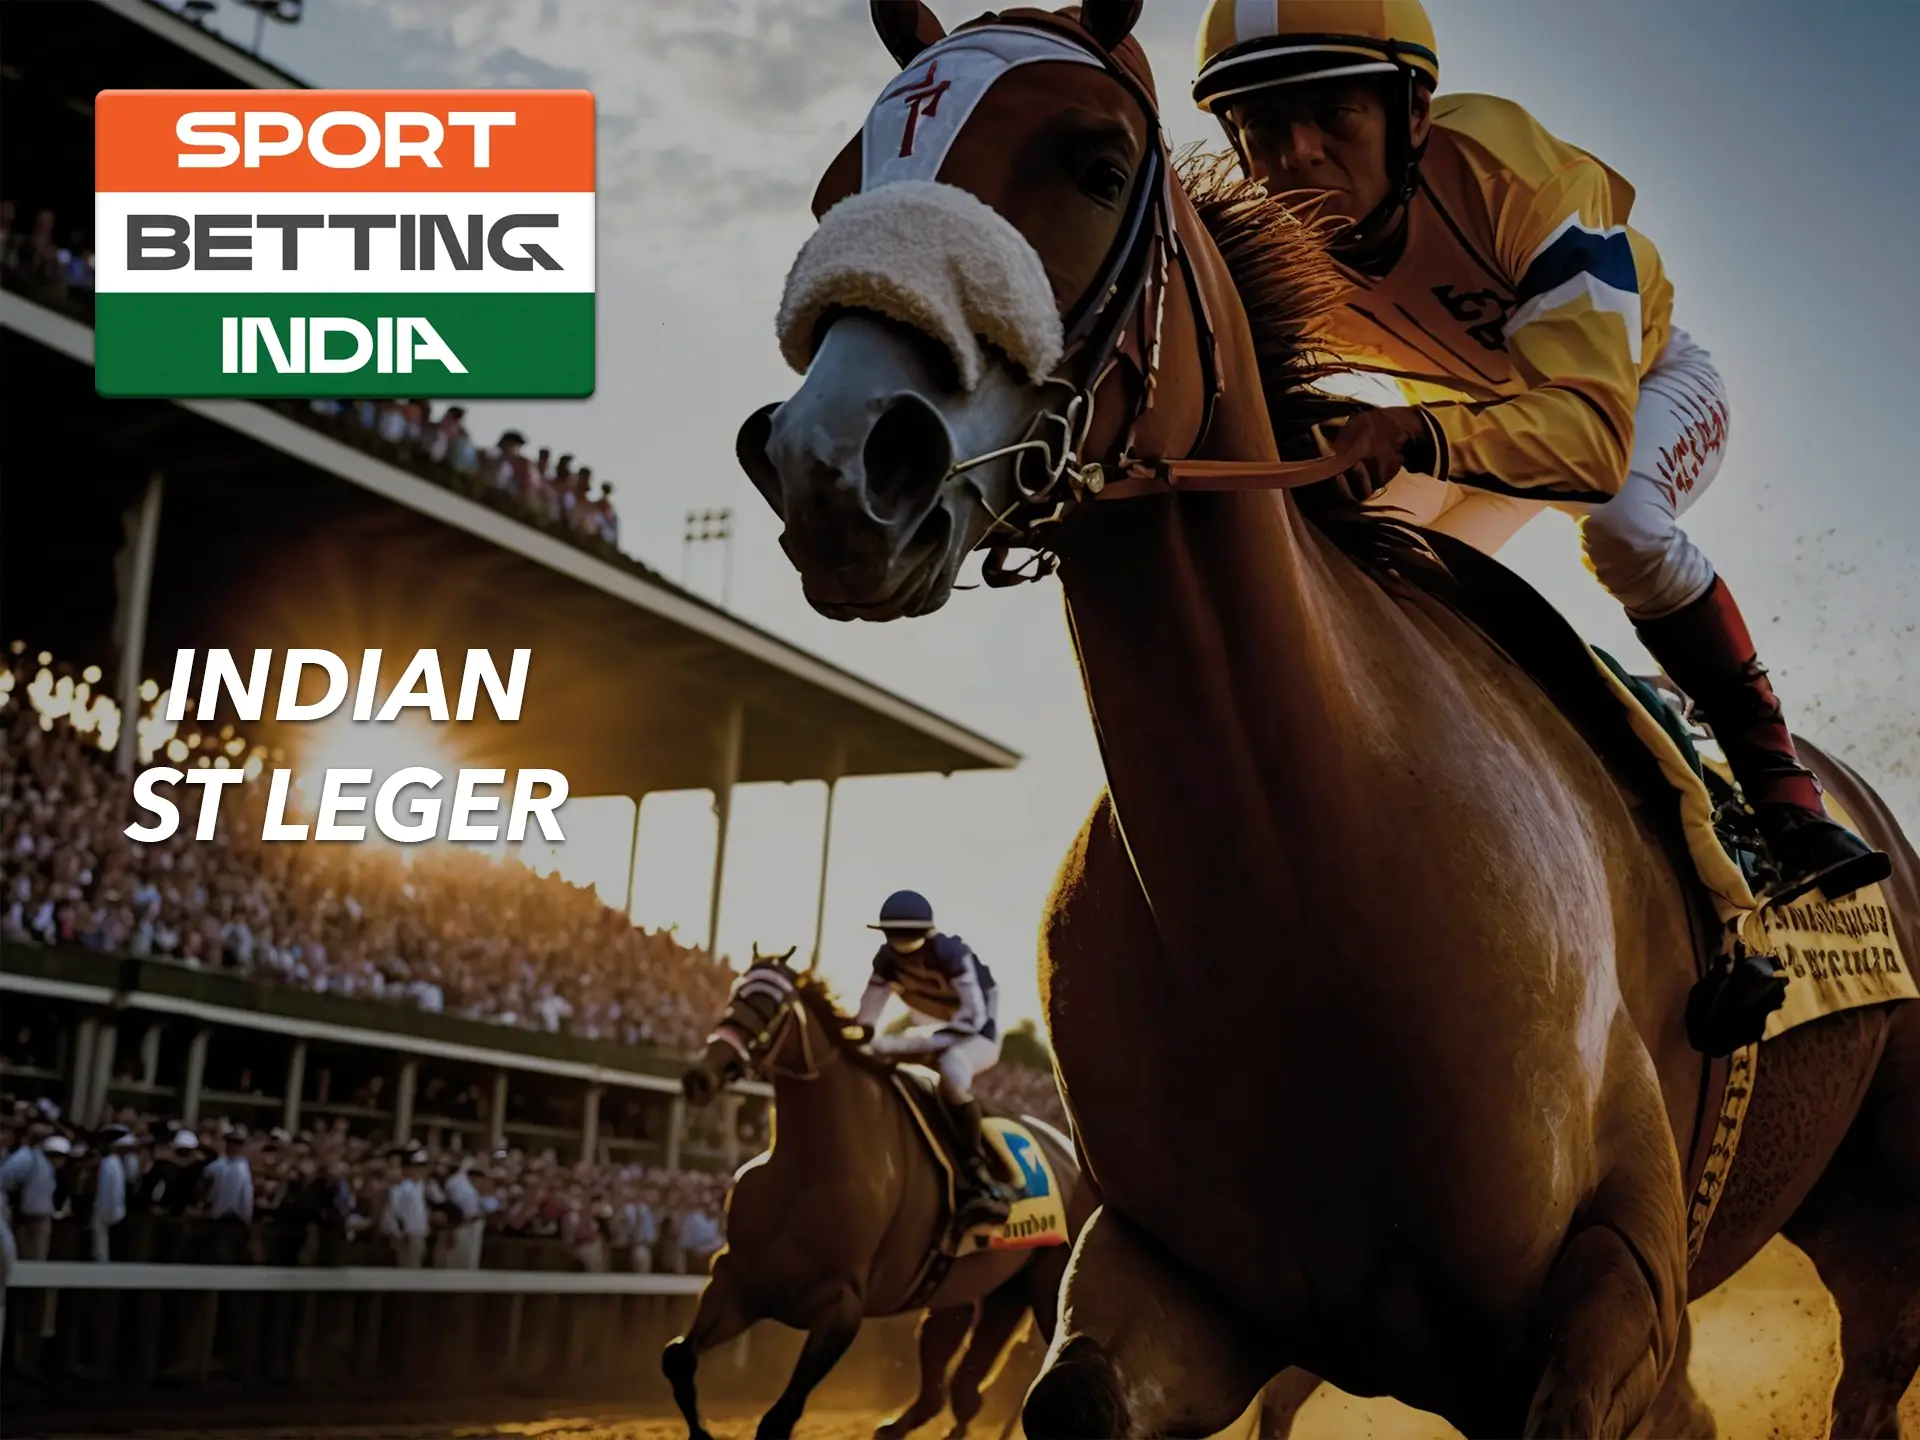 St Leger's most popular tournament awaits your predictions on popular betting sites.